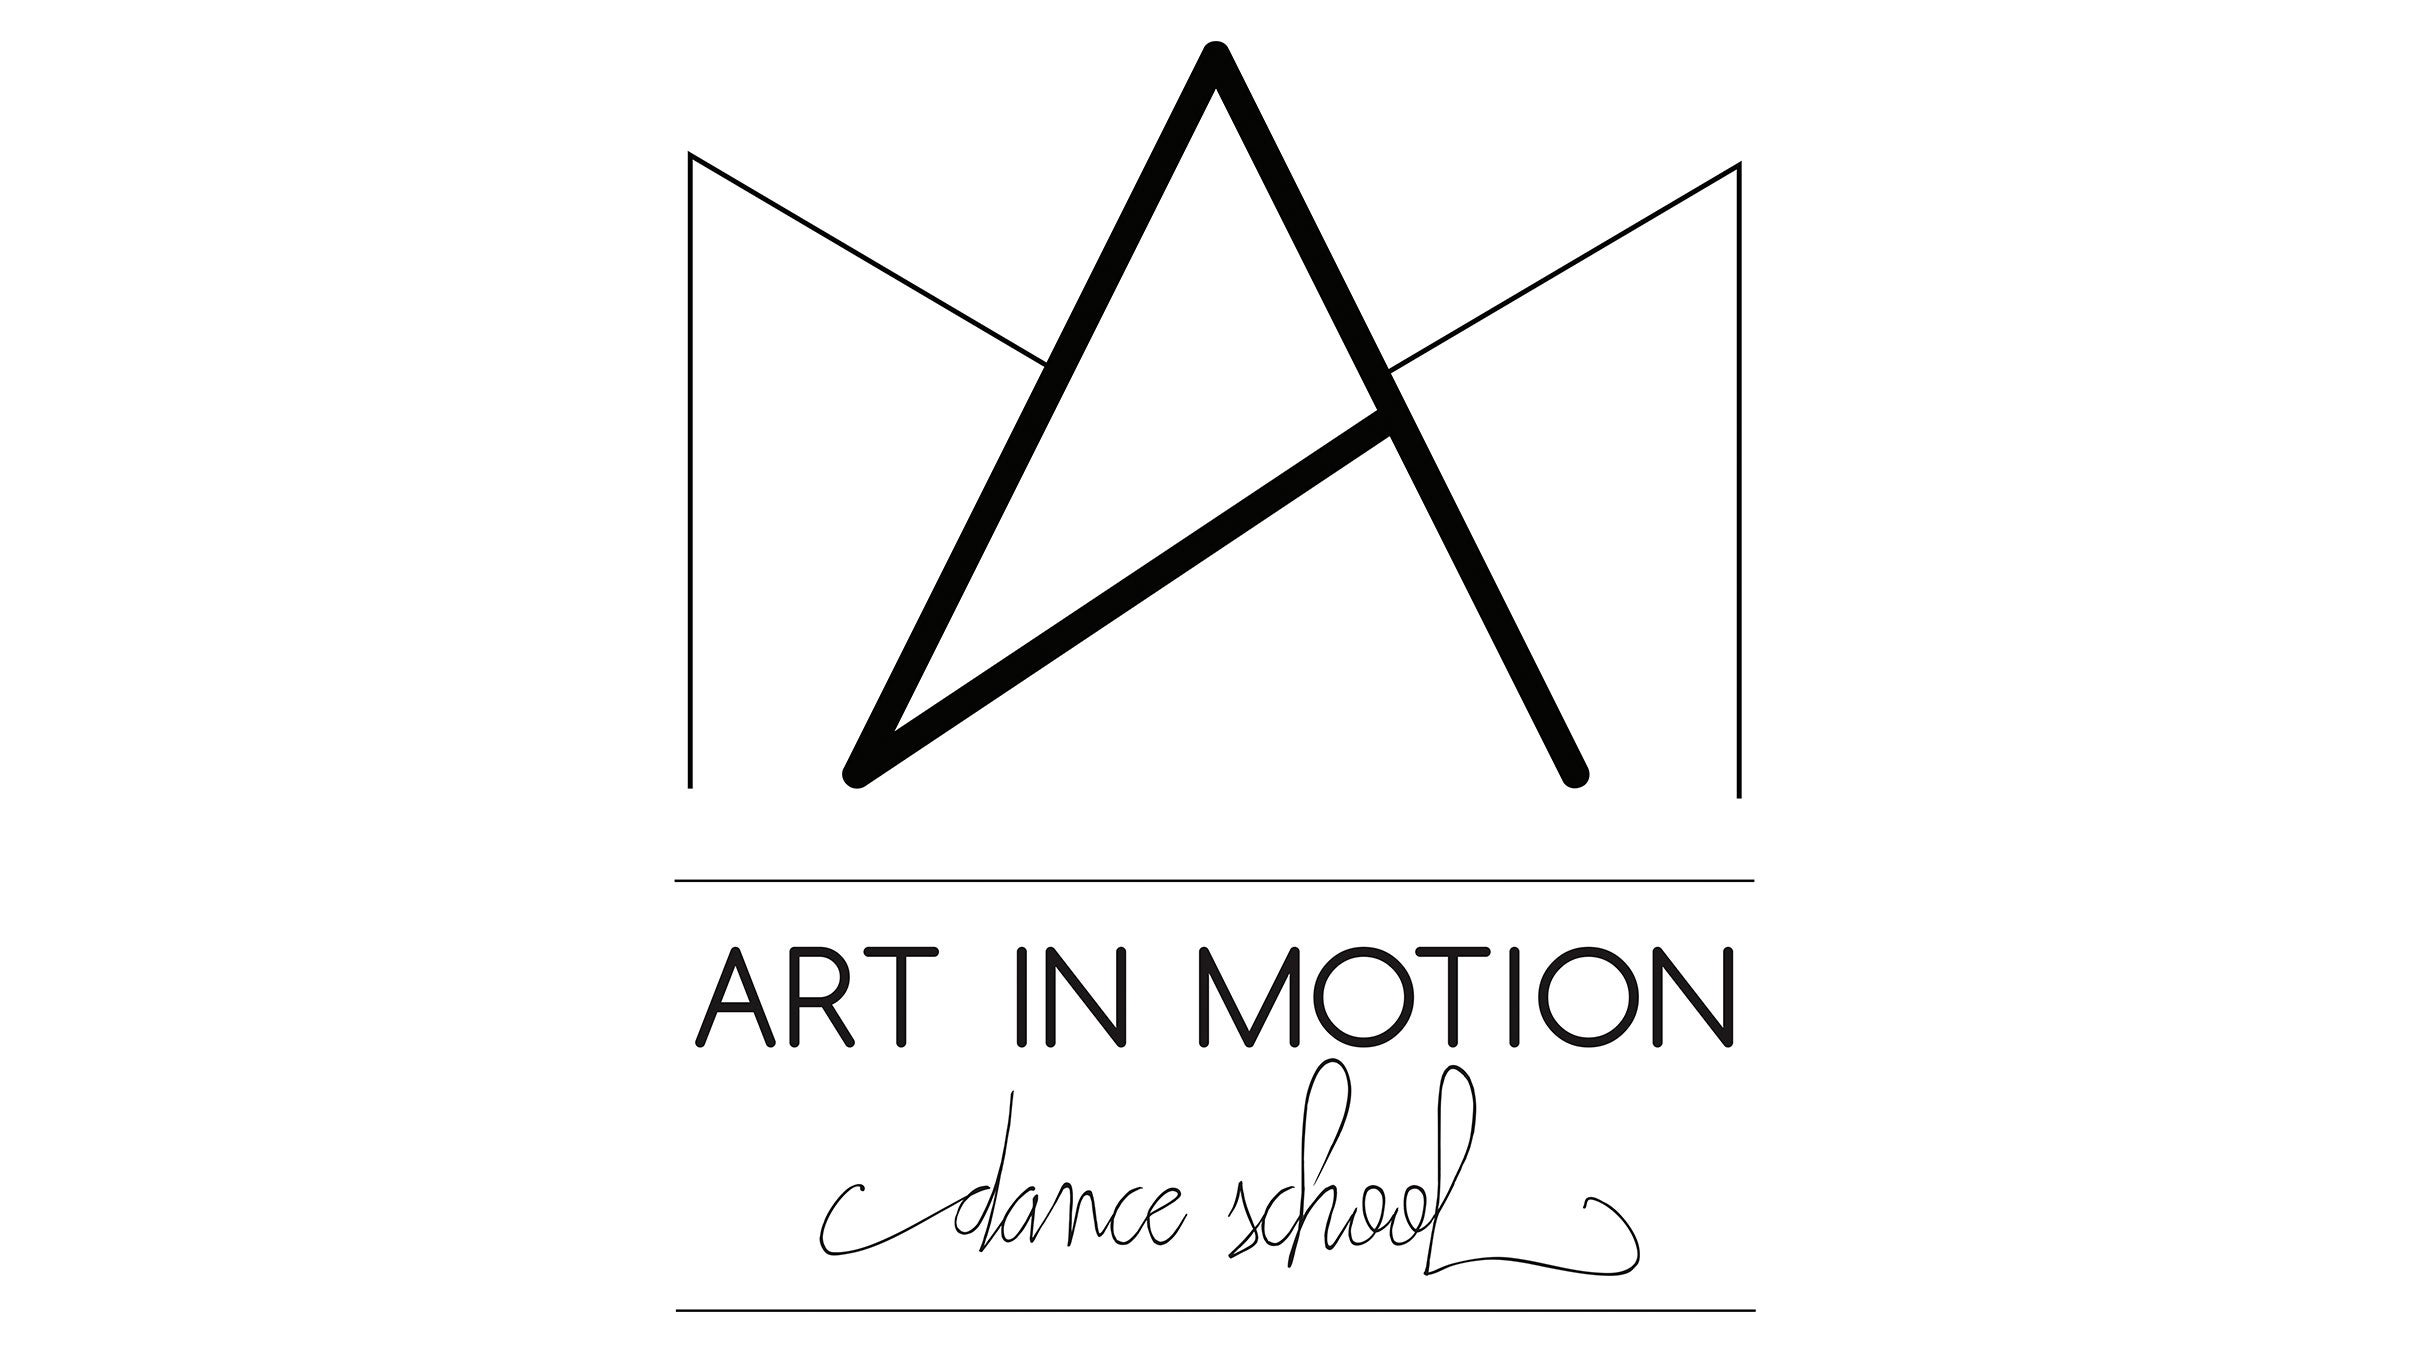 ART IN MOTION PRESENTS: Standing Ovation